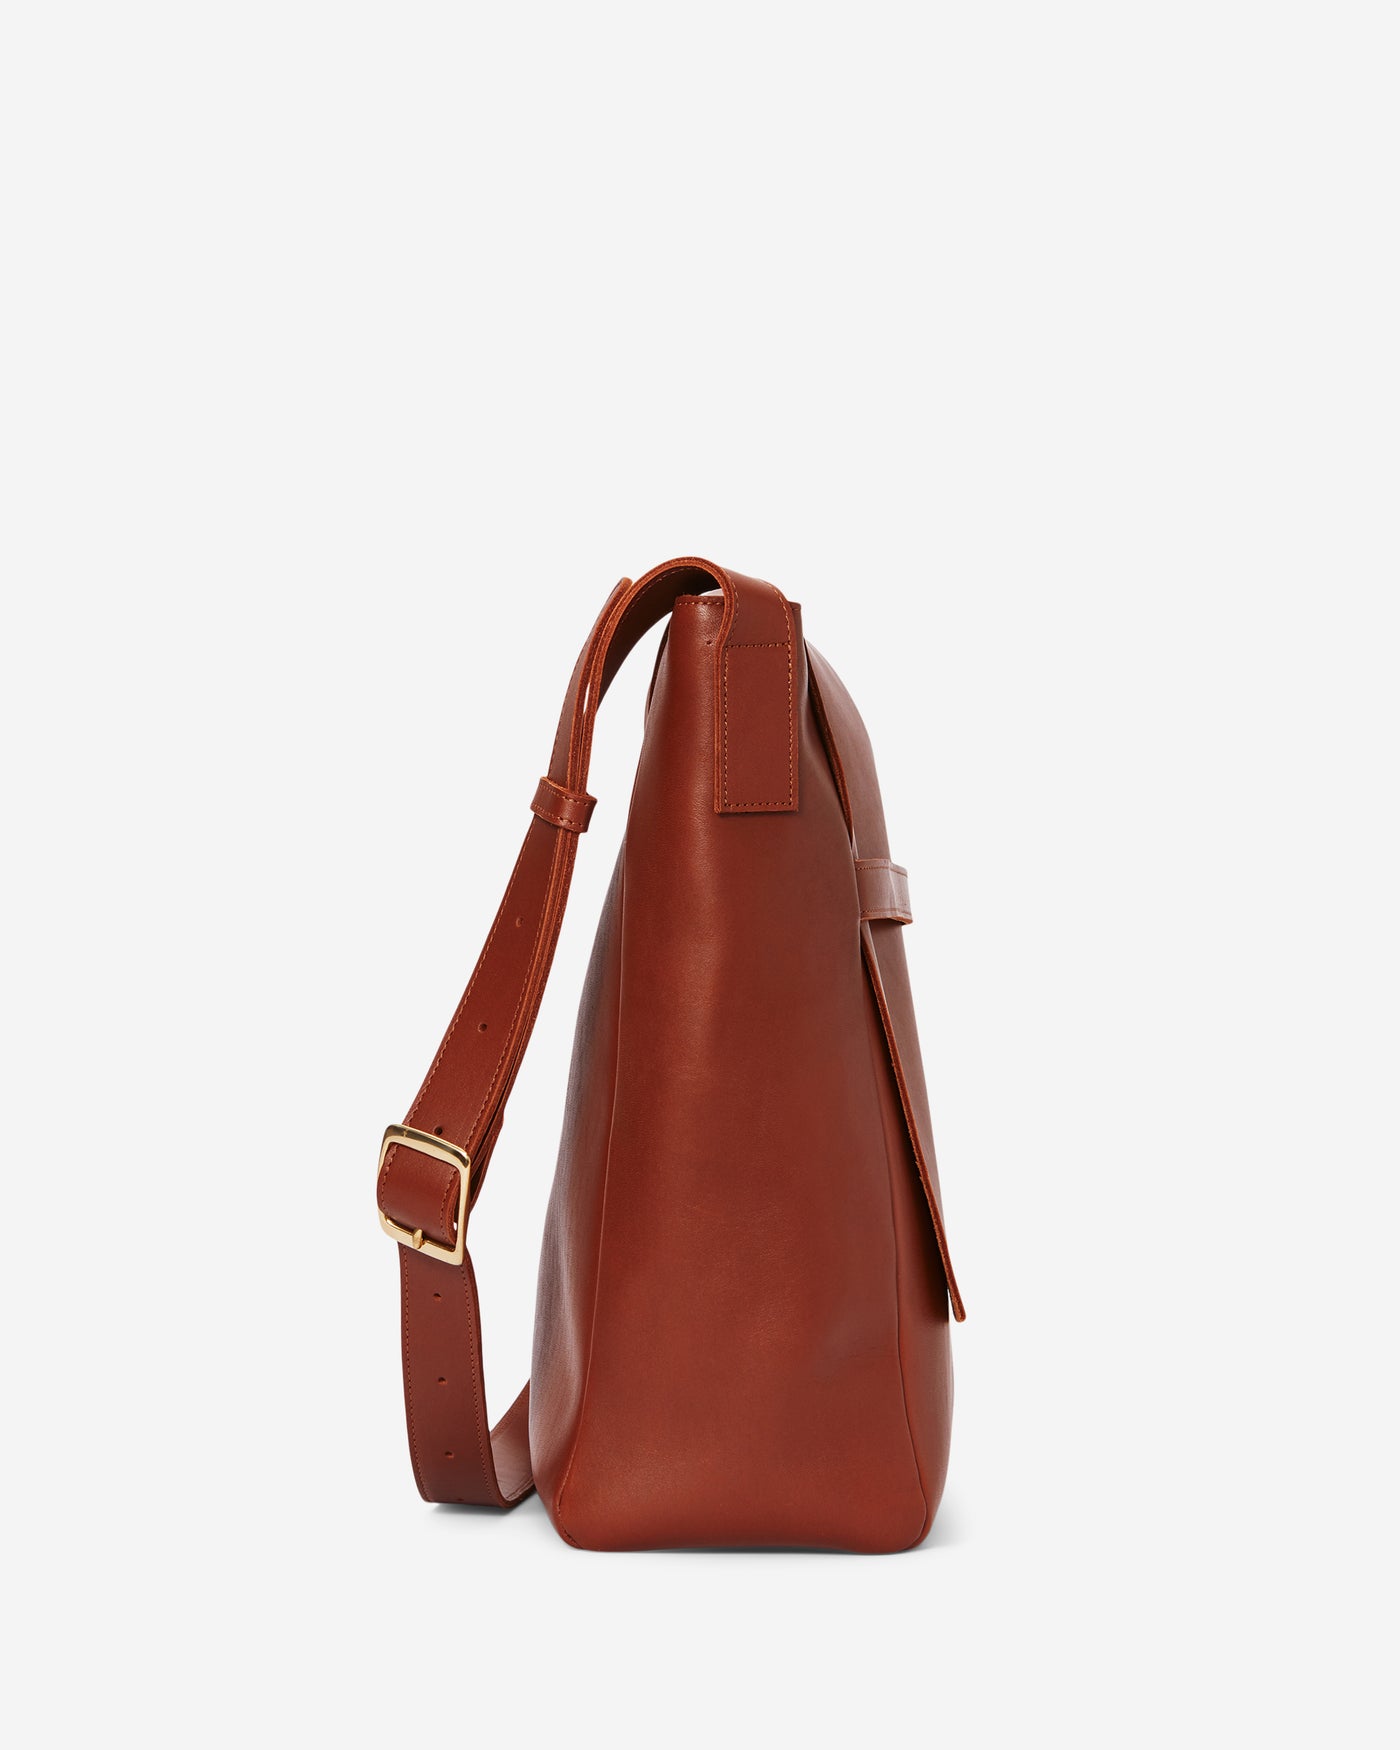 Michelle Bag - Light Brown  Joey James, The Label   